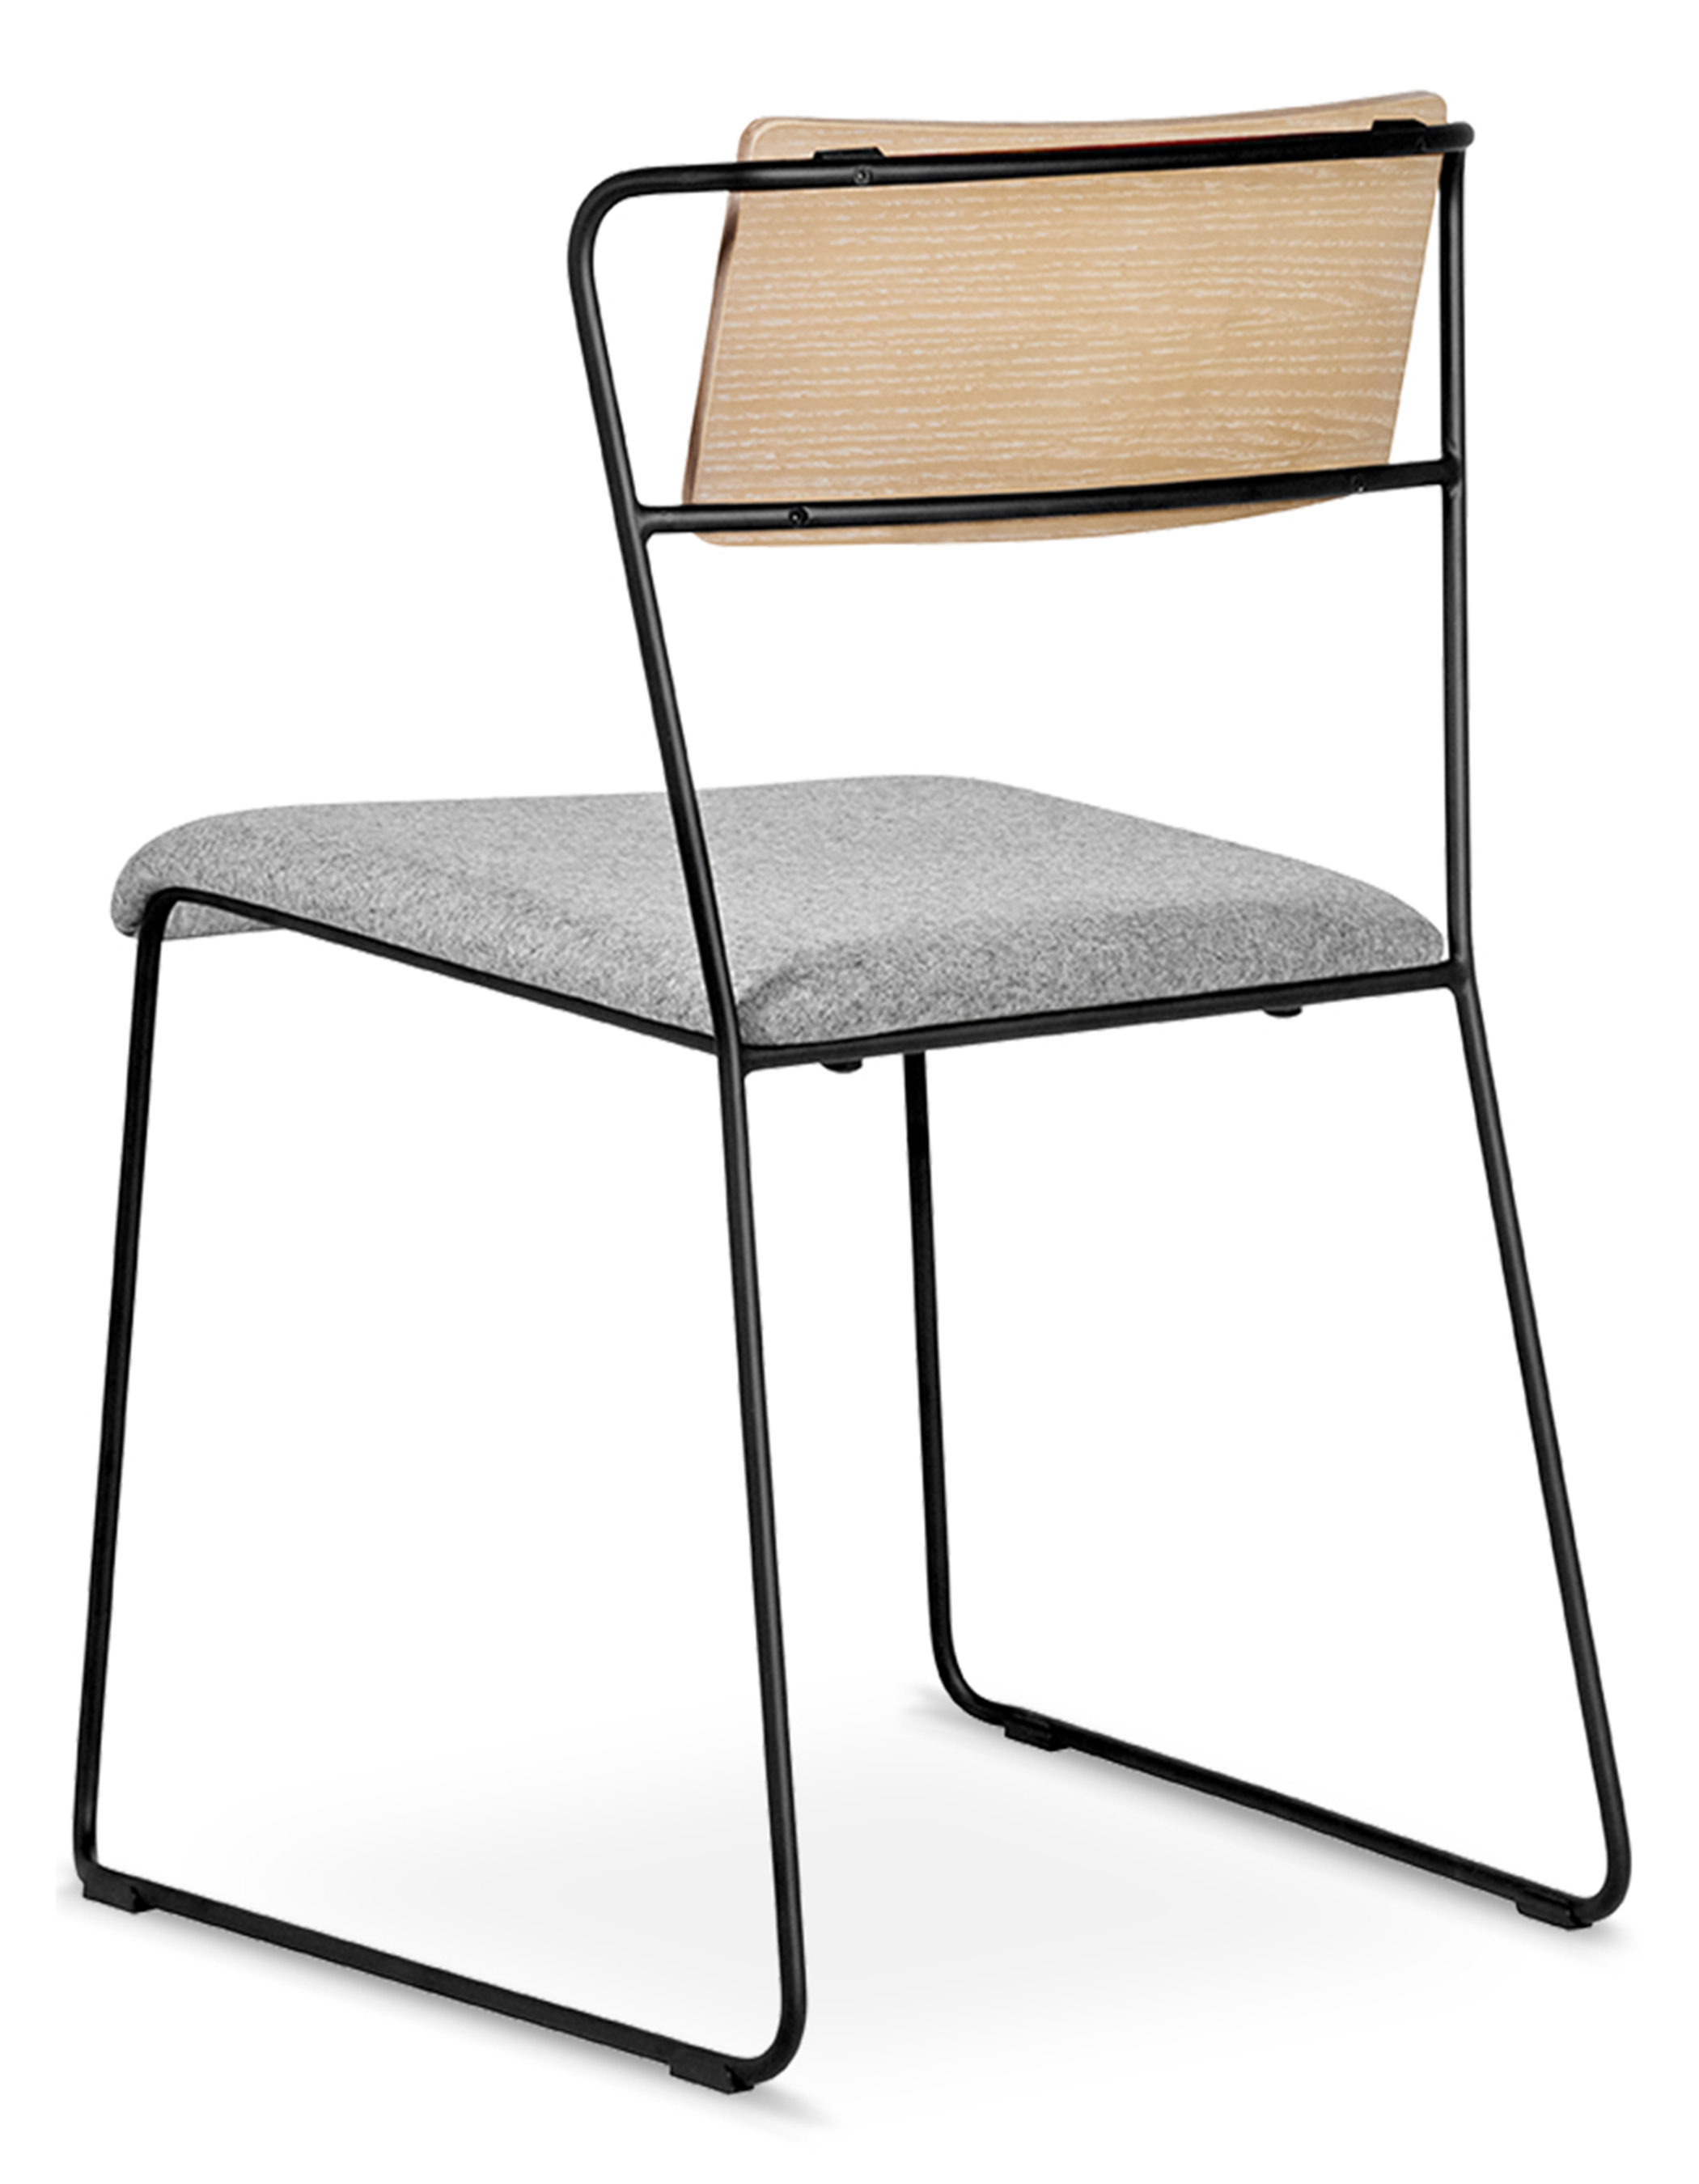 WS - Transit chair - Seat Upholstery (Back angle)